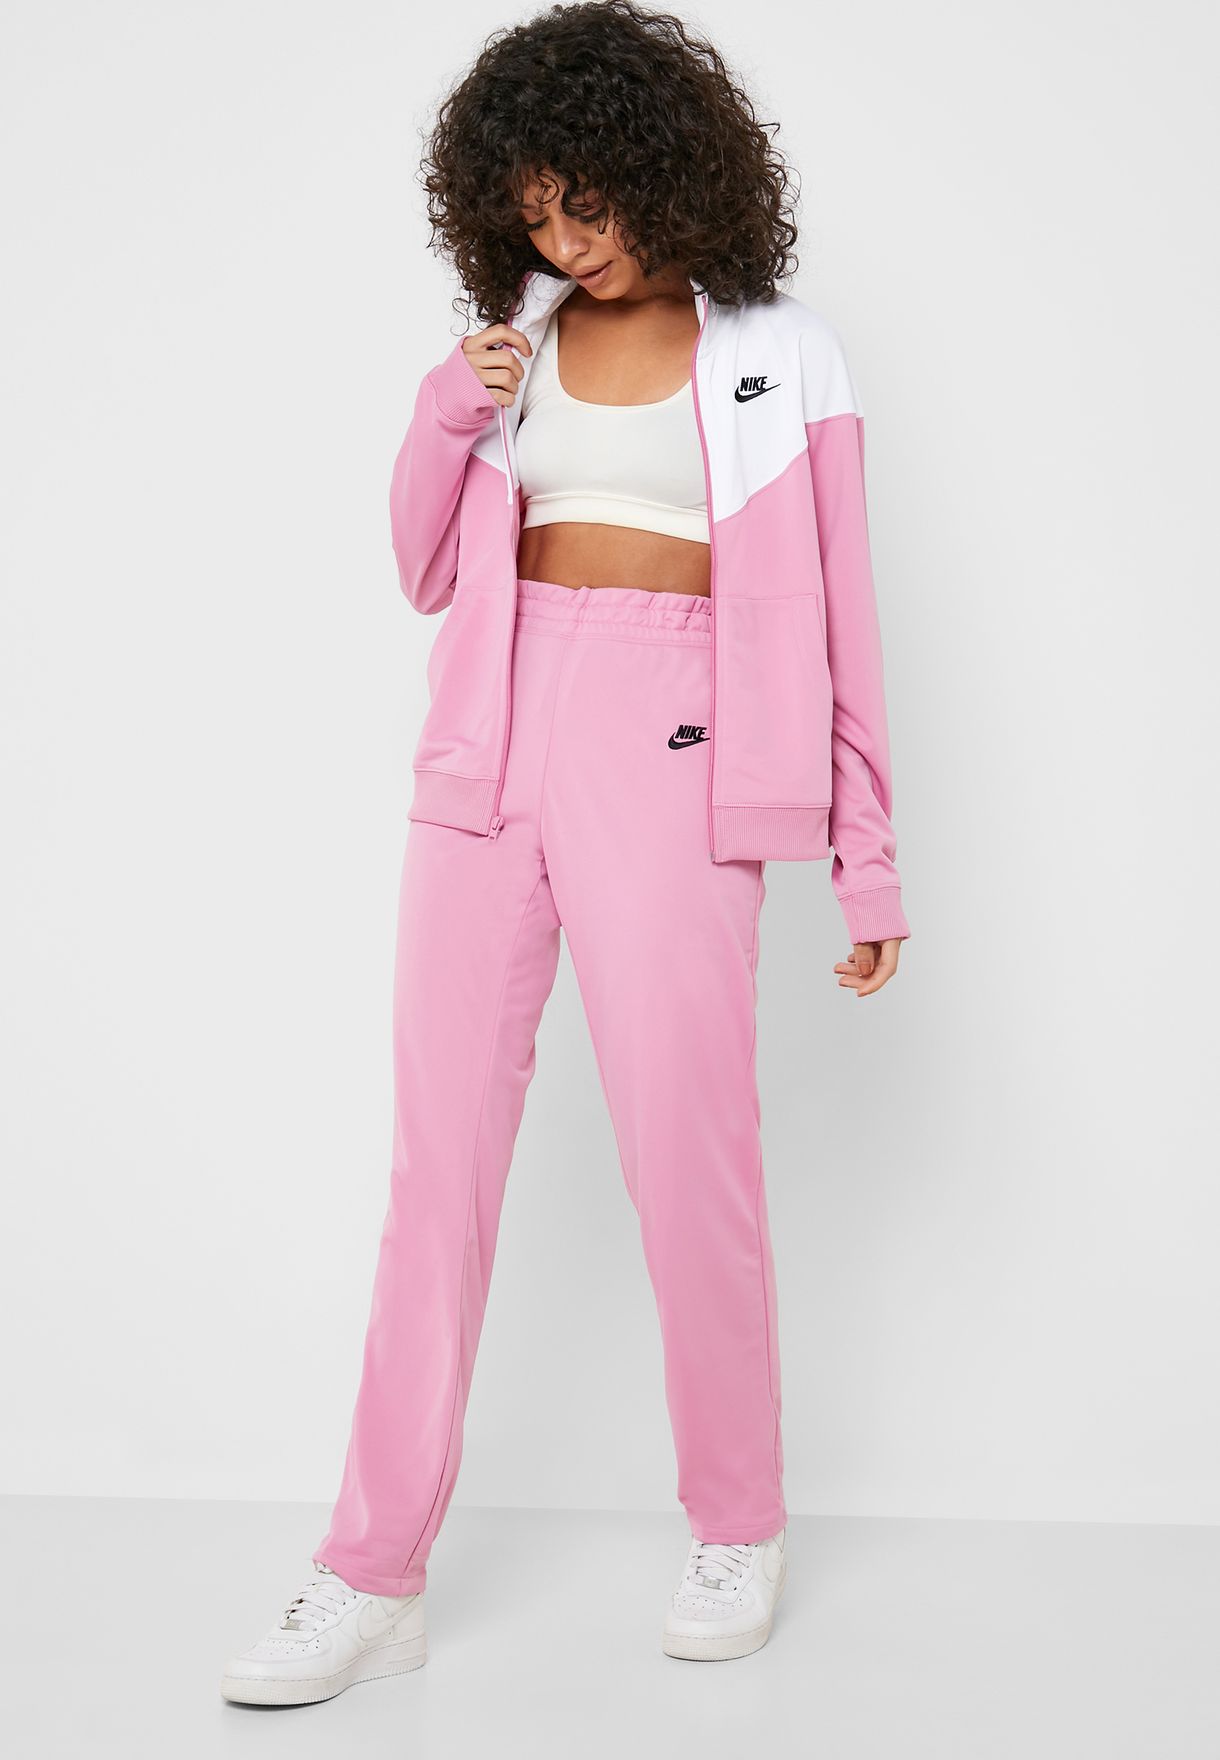 Buy Nike multicolor NSW Tracksuit for 